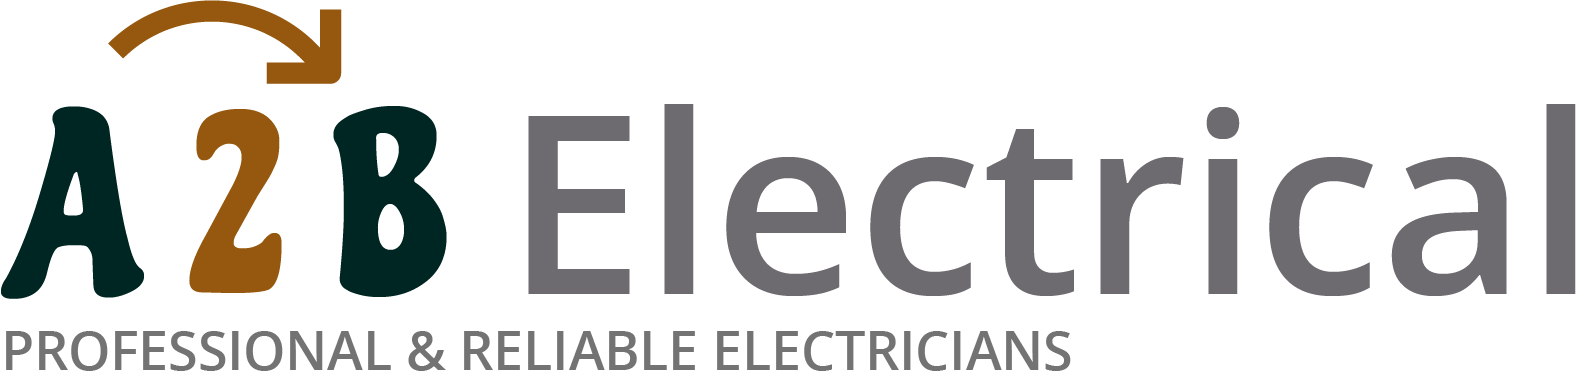 If you have electrical wiring problems in Bridgwater, we can provide an electrician to have a look for you. 